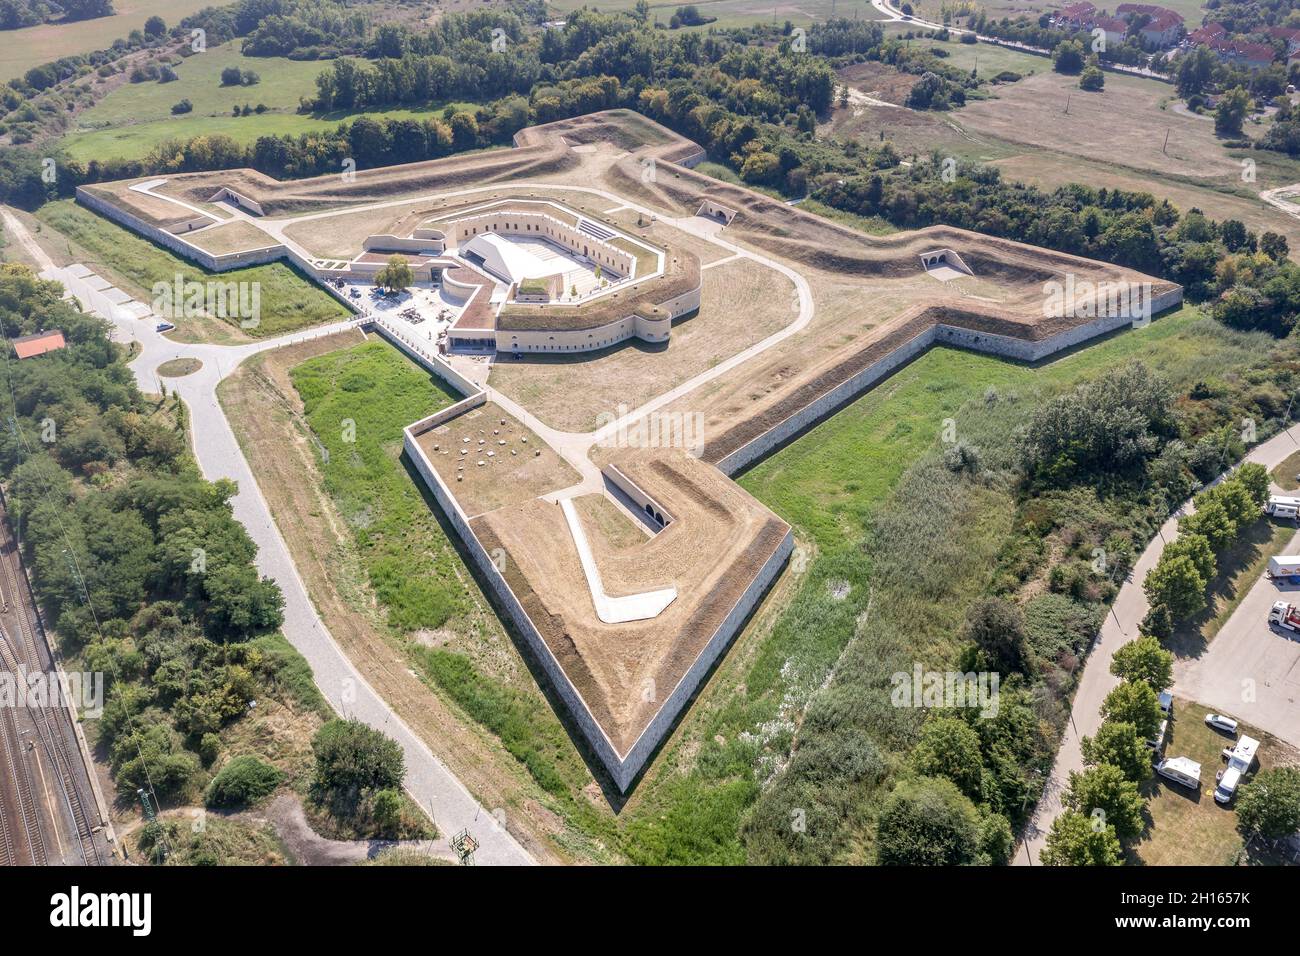 Aerial view of star fort (Csillag erod) pn the Hungarian side of Komarom Komarno along Danube river with four large casemated bastion Caponier Stock Photo